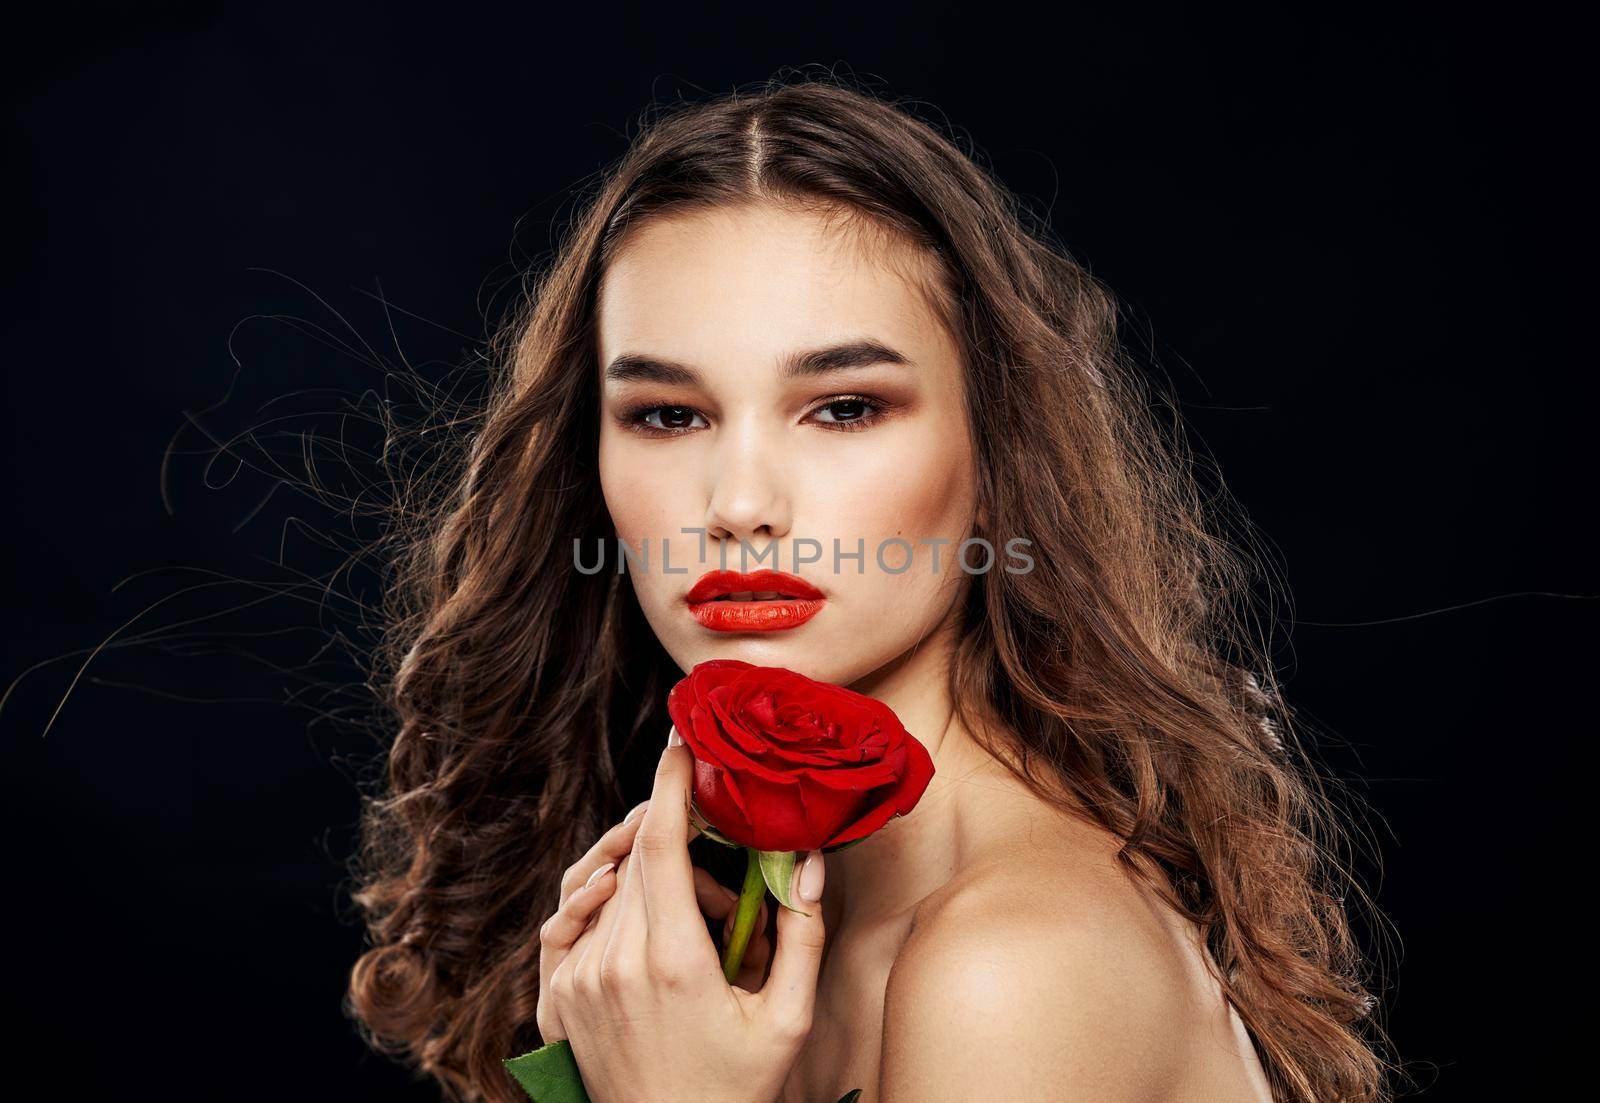 Brunette woman with a red rose in her hand on a dark background close-up by SHOTPRIME